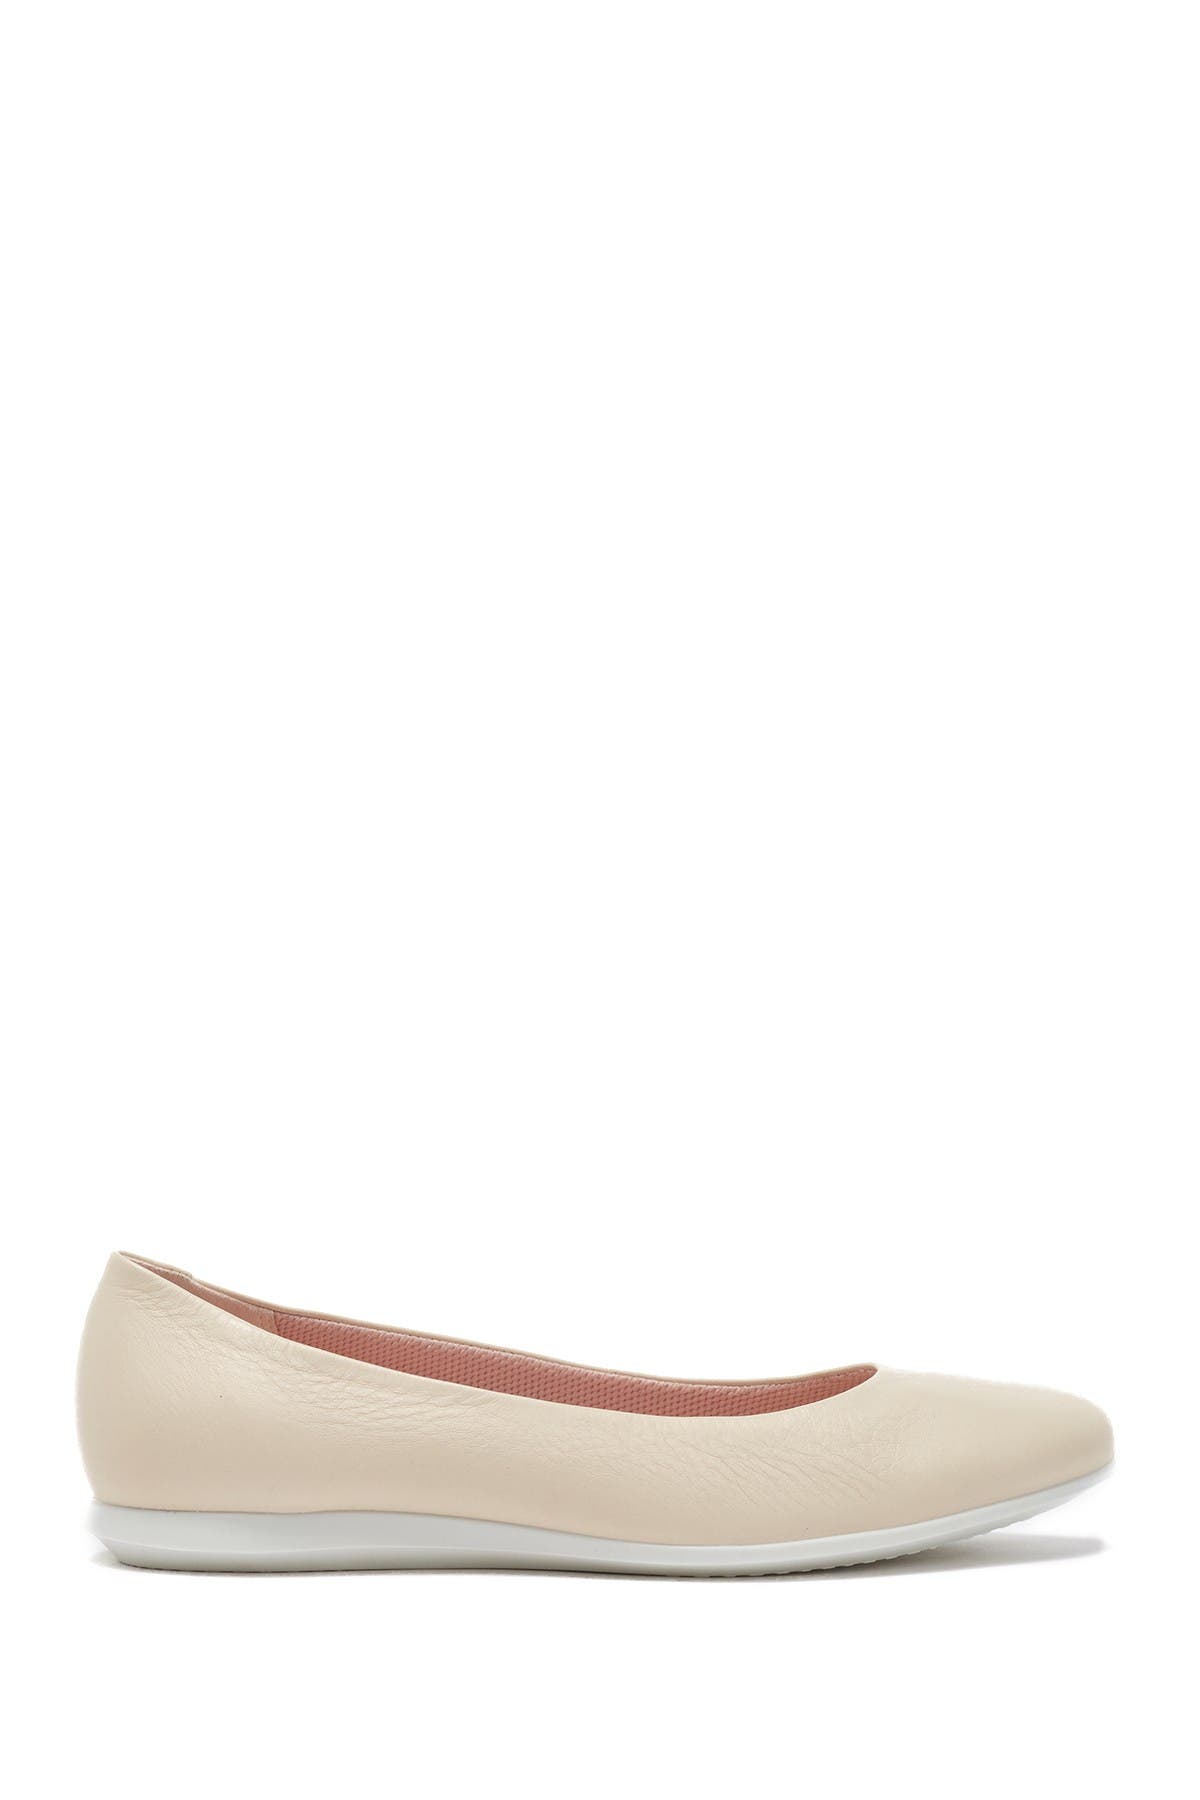 ECCO | Touch Leather Ballerina 2.0 Flat | Nordstrom Rack